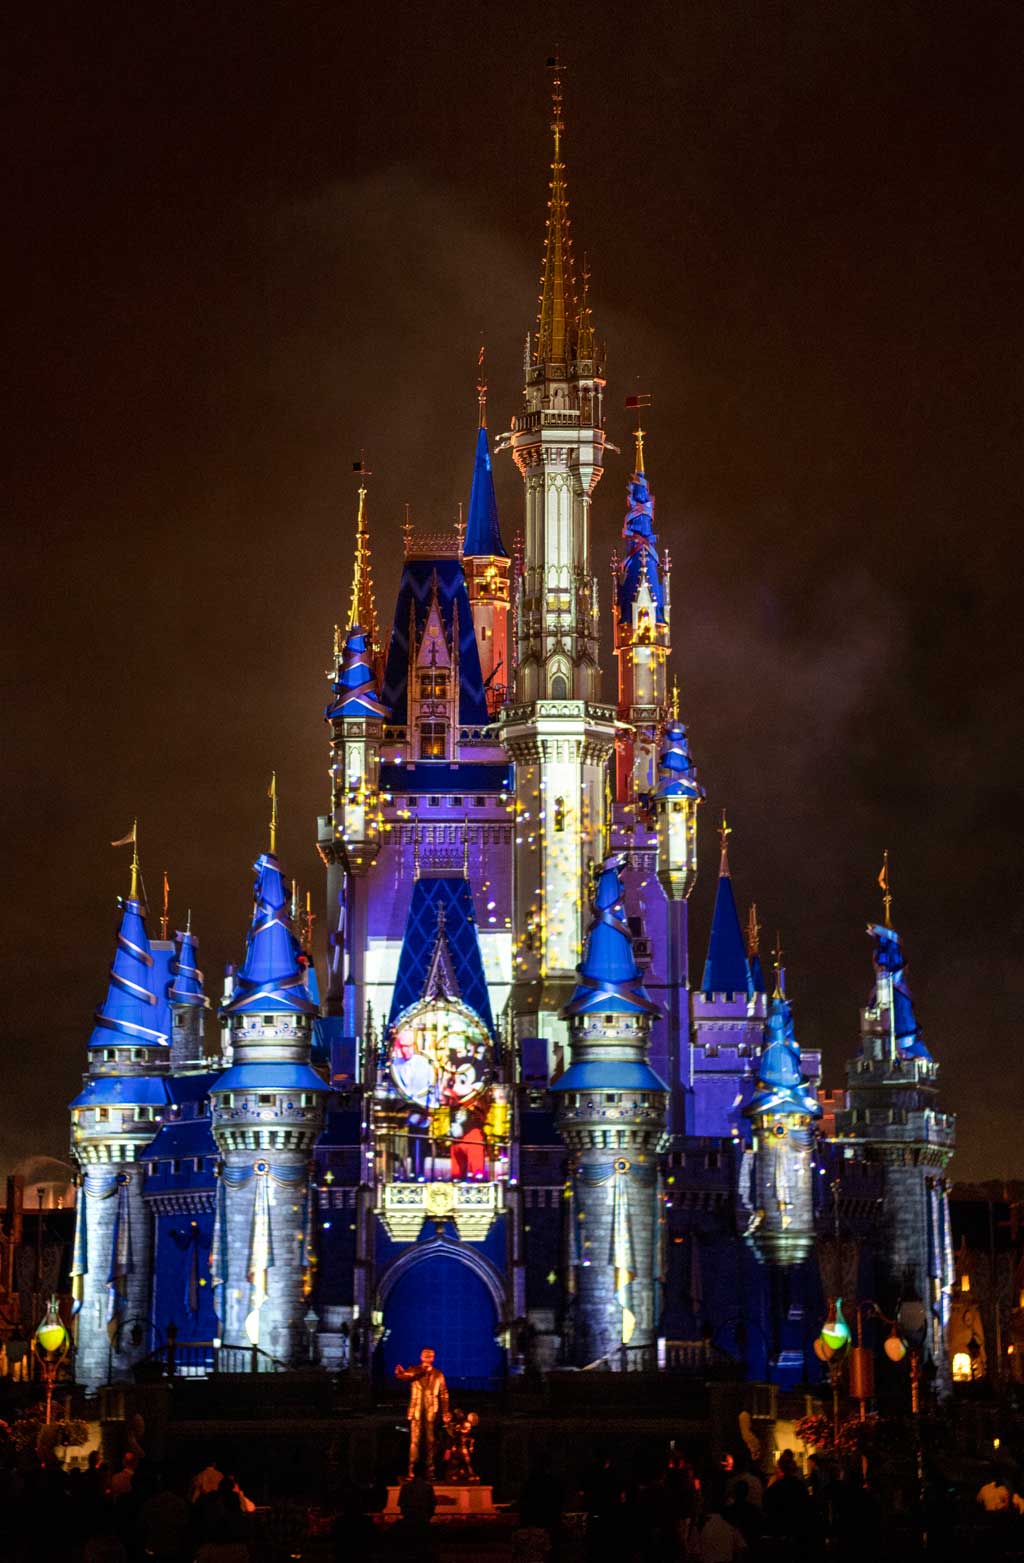  ‘Disney Enchantment’ at Magic Kingdom Park at Walt Disney World Resort in Lake Buena Vista, Fla., now shimmers like never before in celebration of Walt Disney’s vision and 50 years of magic. (Kent Phillips, Photographer) 